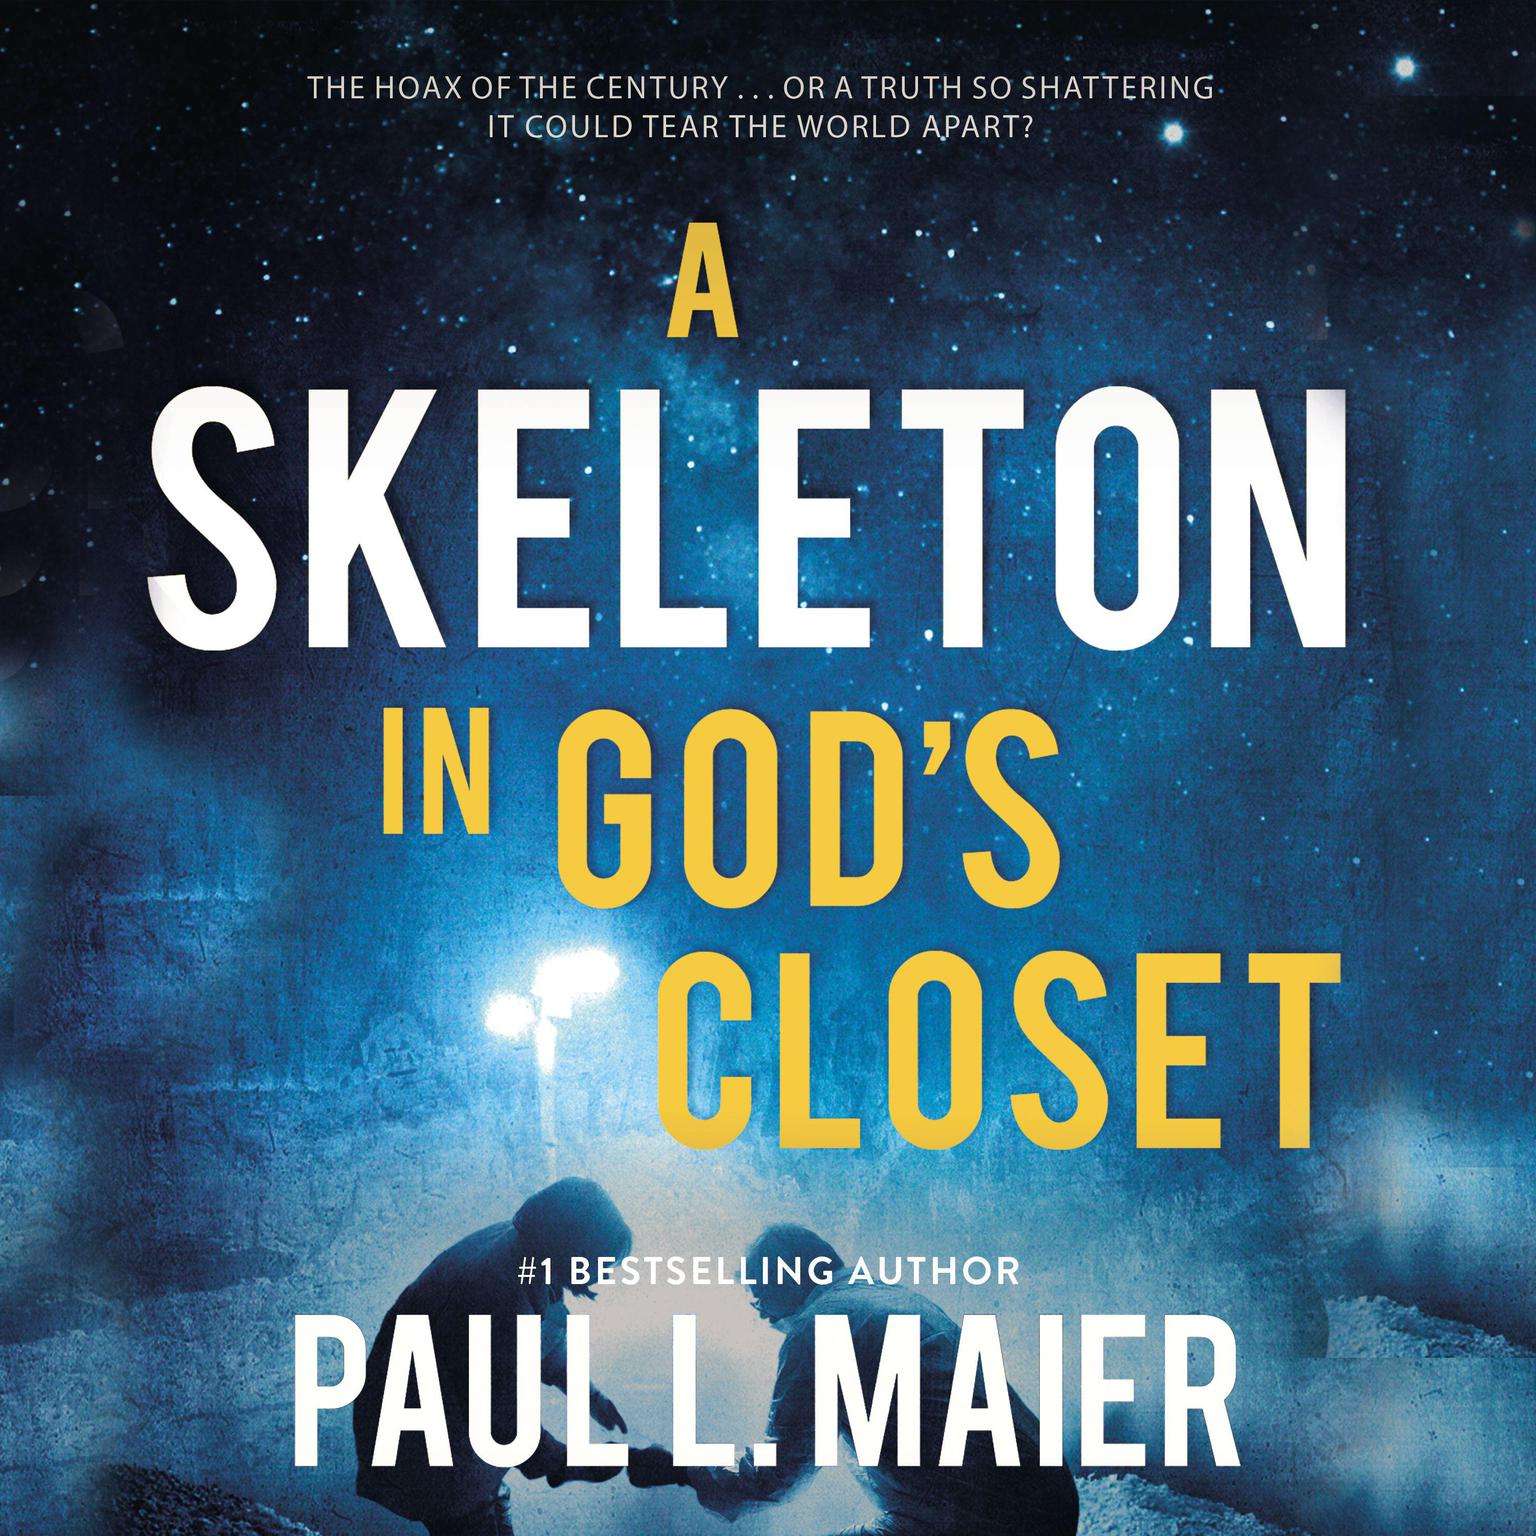 A Skeleton in Gods Closet Audiobook, by Paul L. Maier